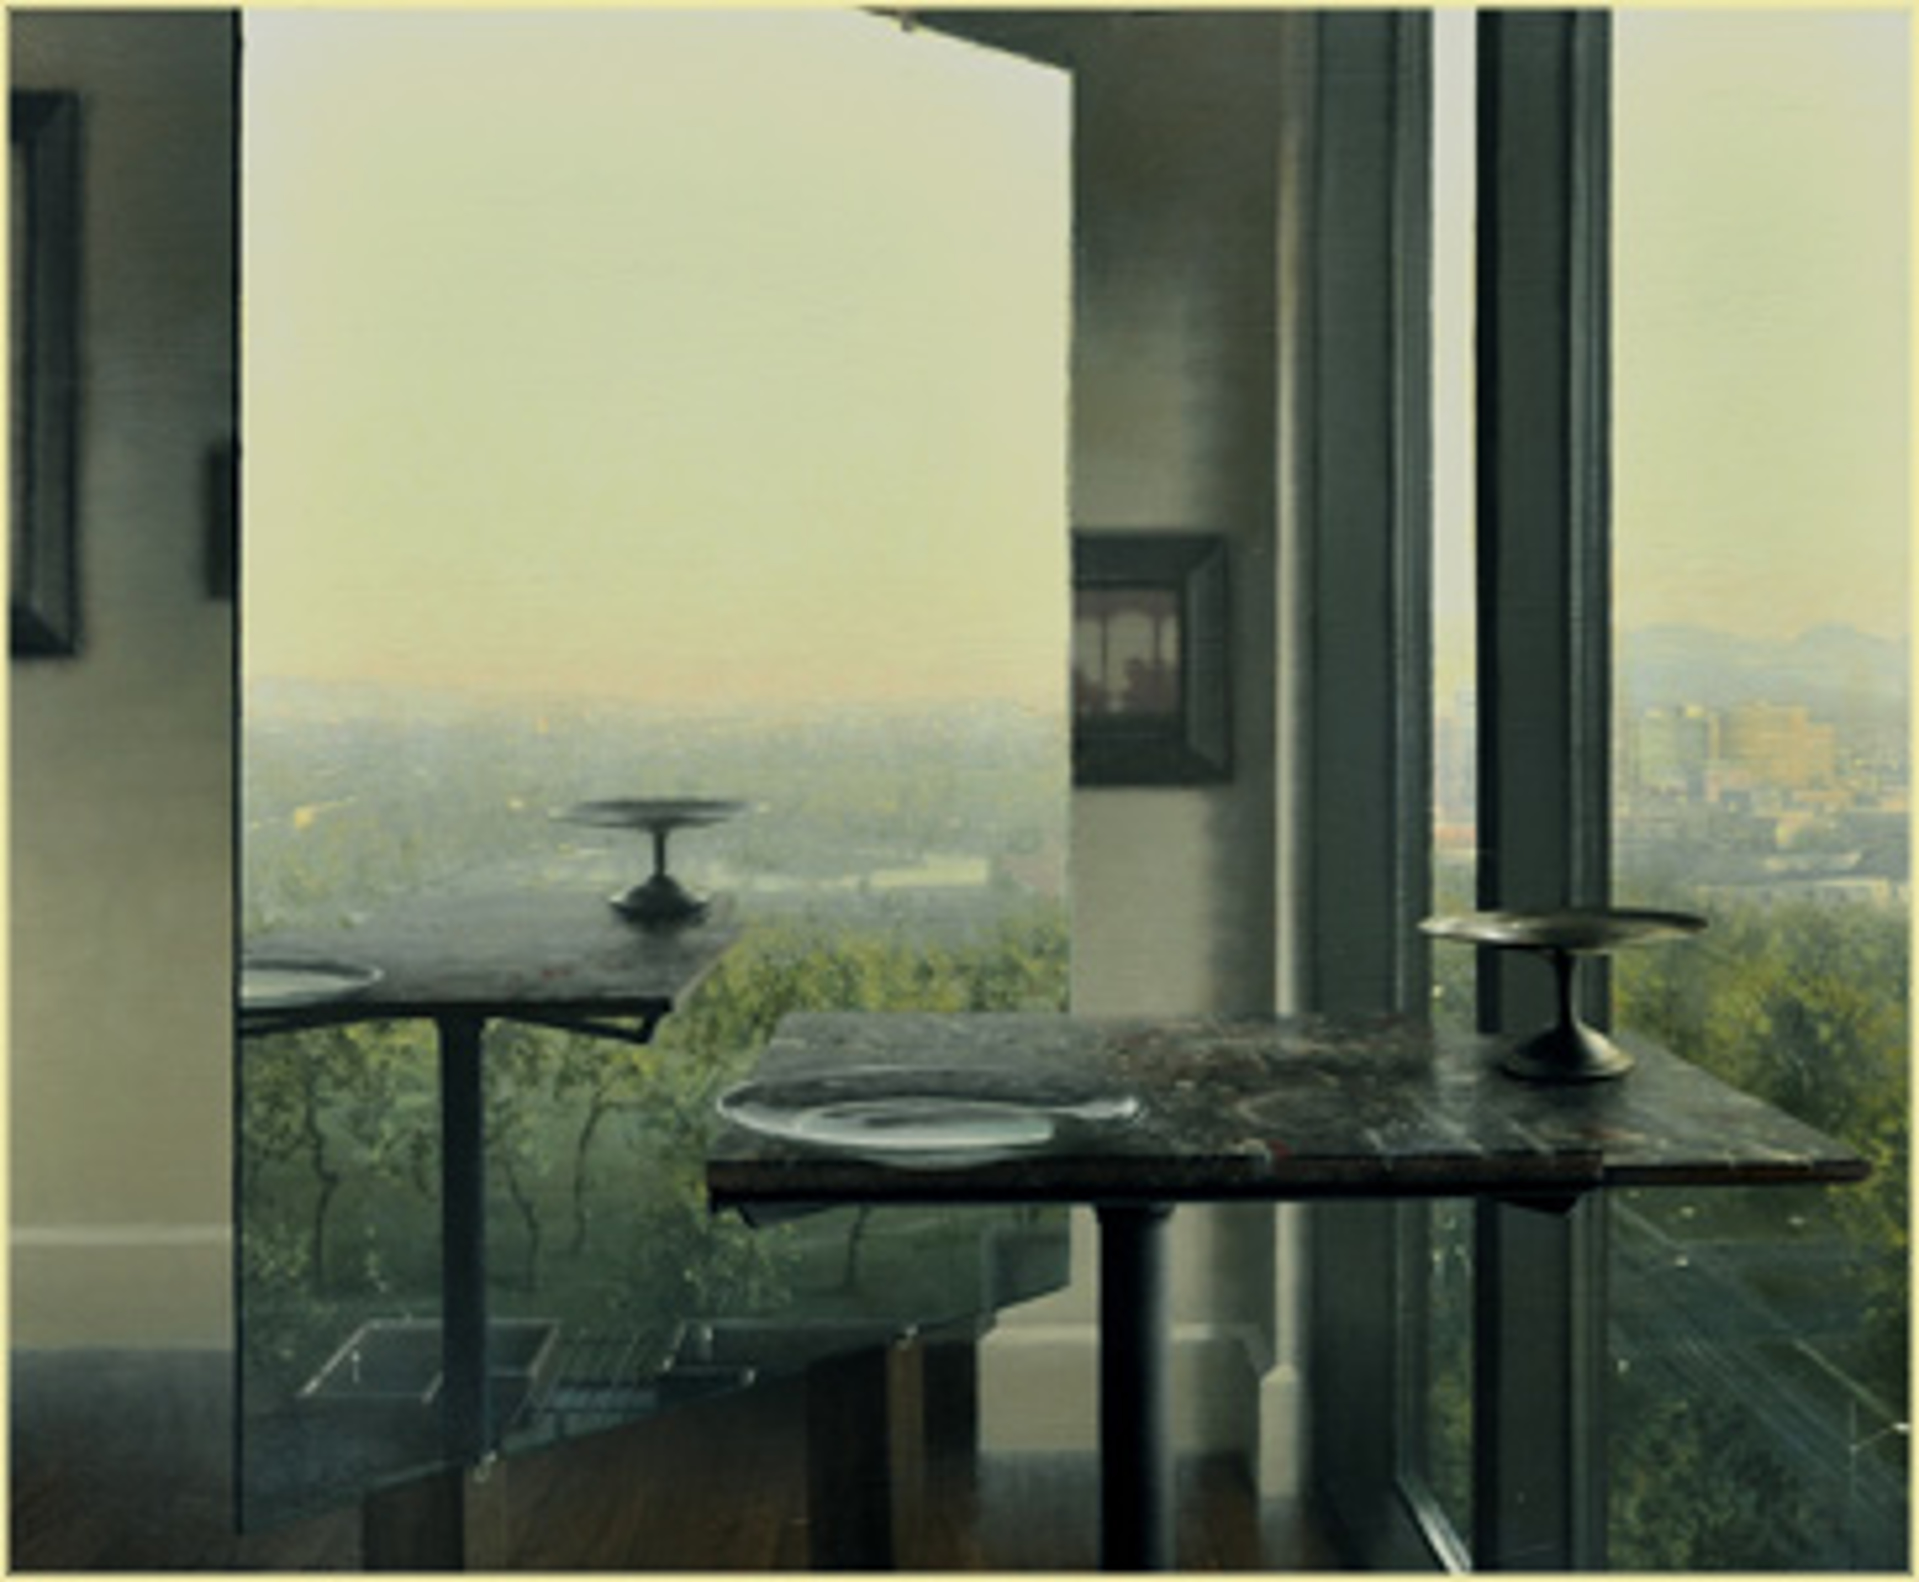 Studio with View of the City by Daniel Sprick